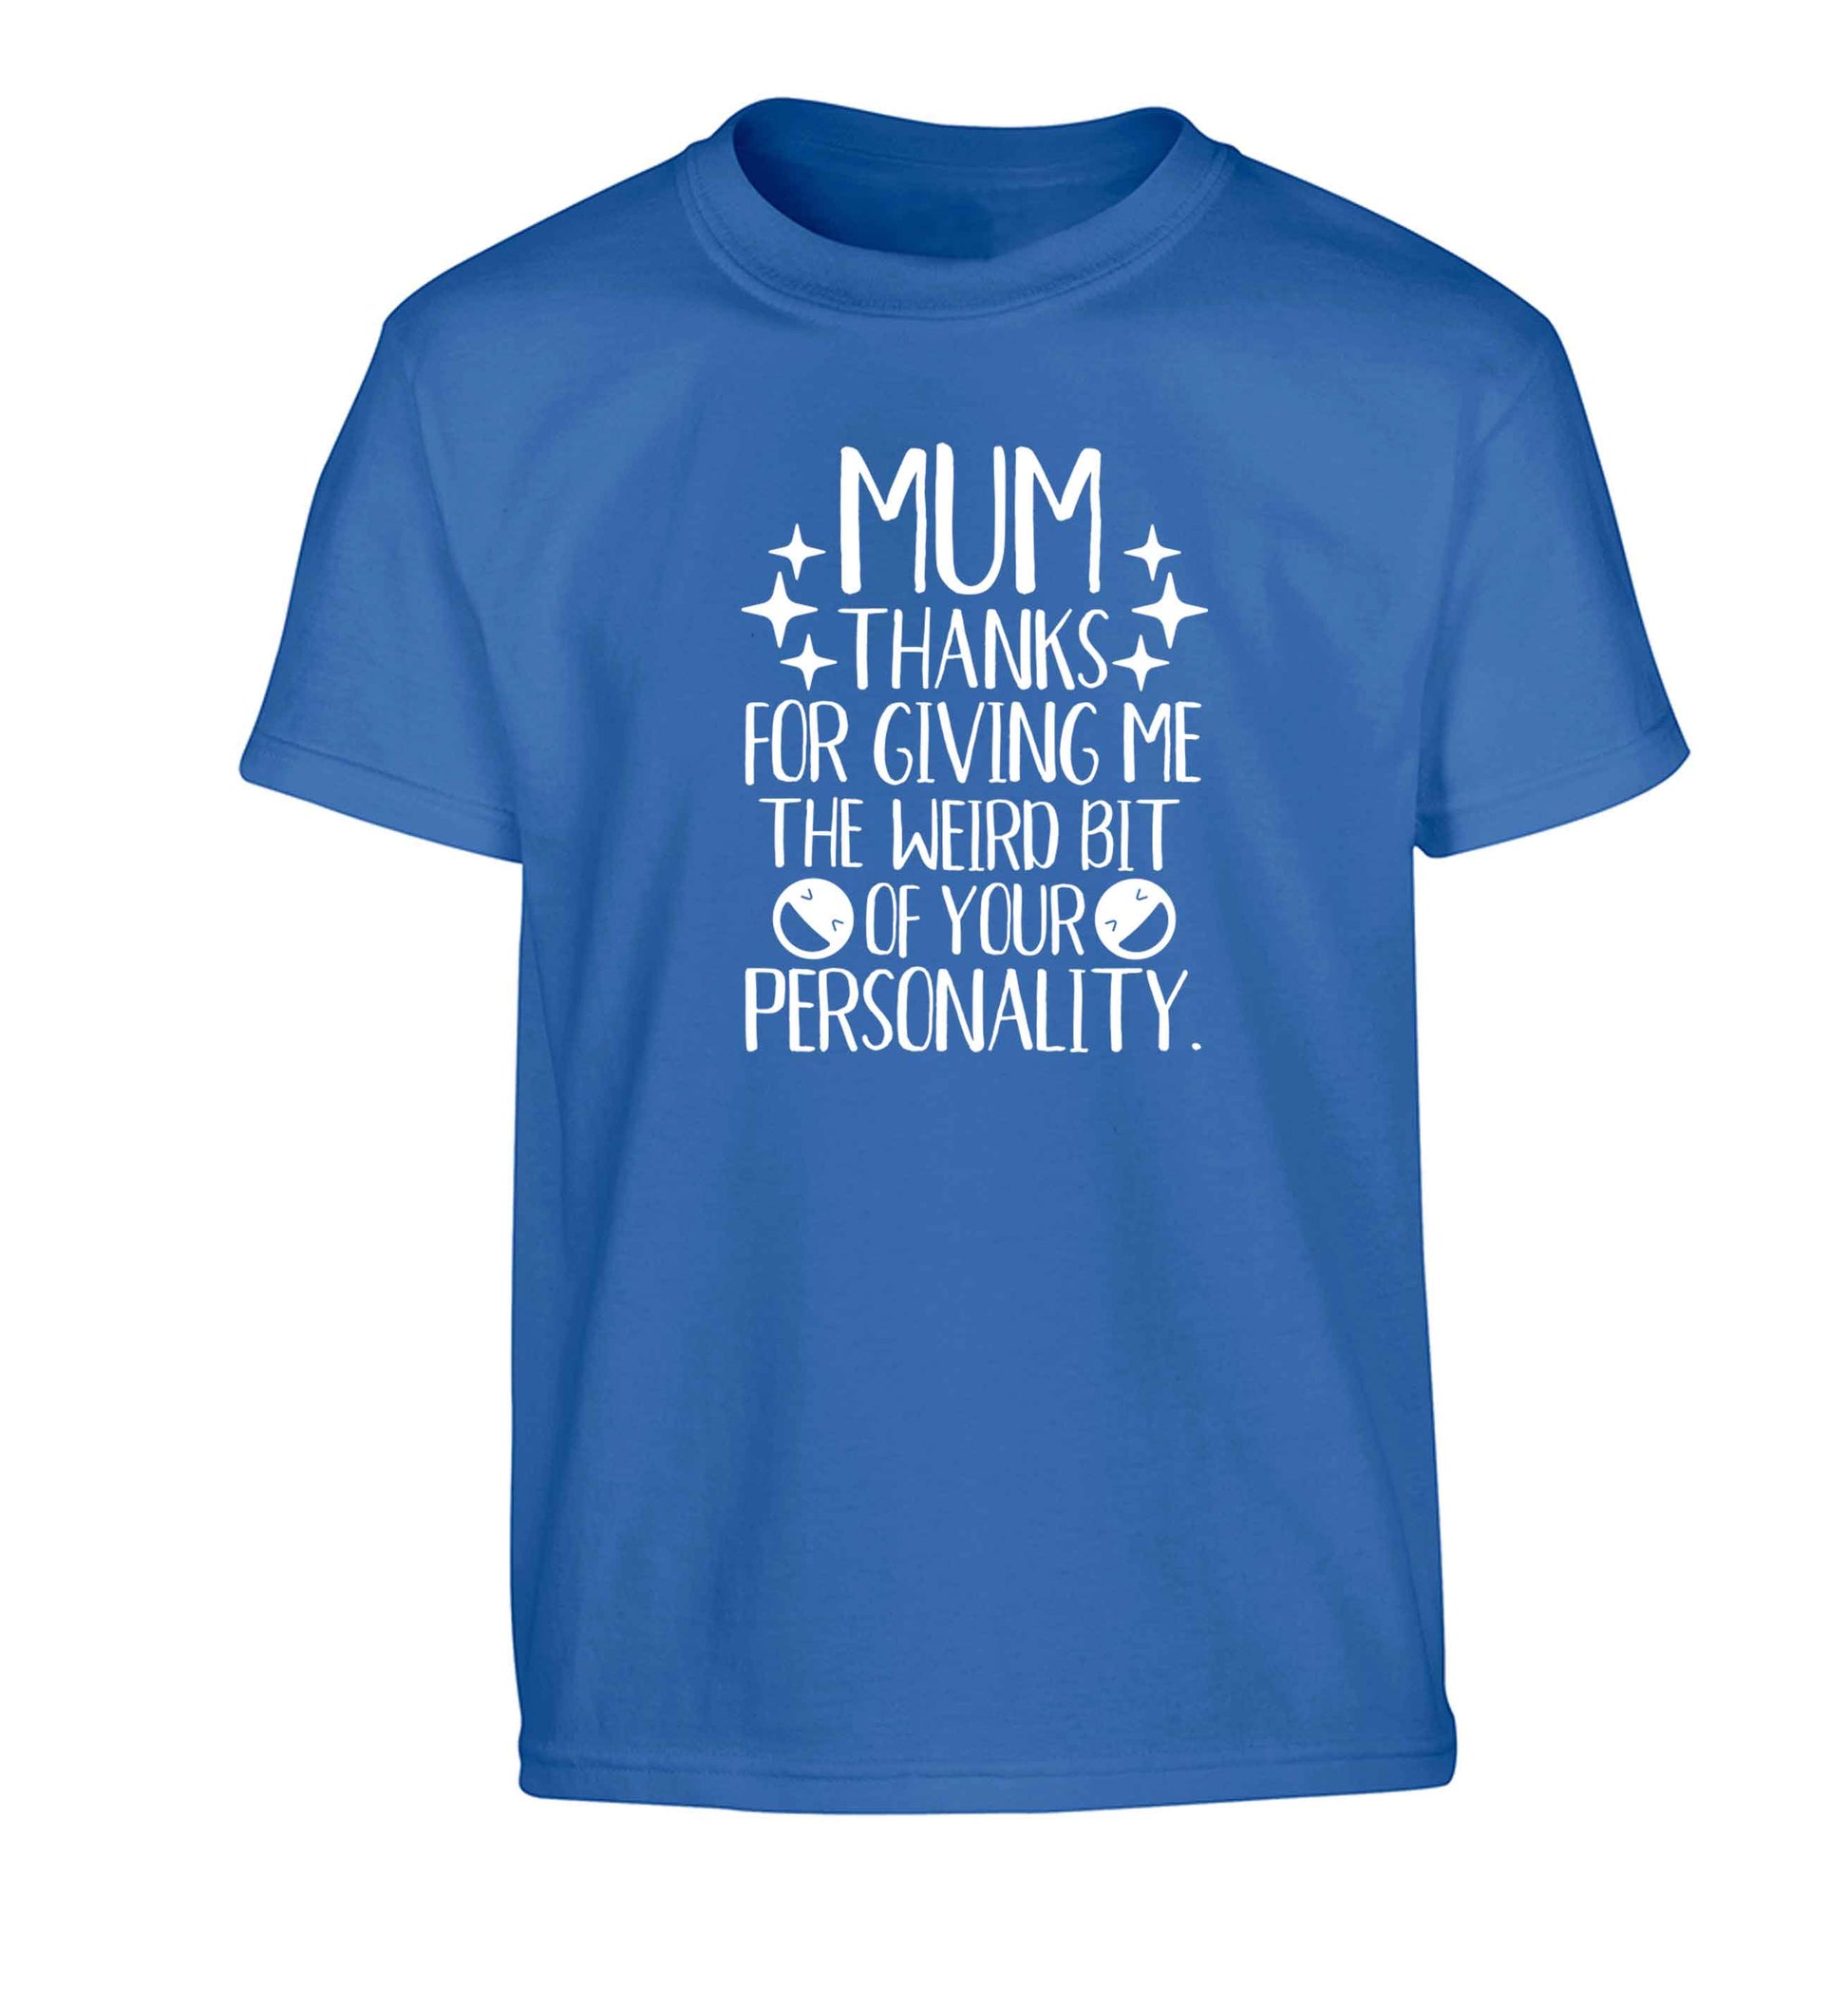 Mum, I love you more than halloumi and if you know me at all you know how deep that is Children's blue Tshirt 12-13 Years